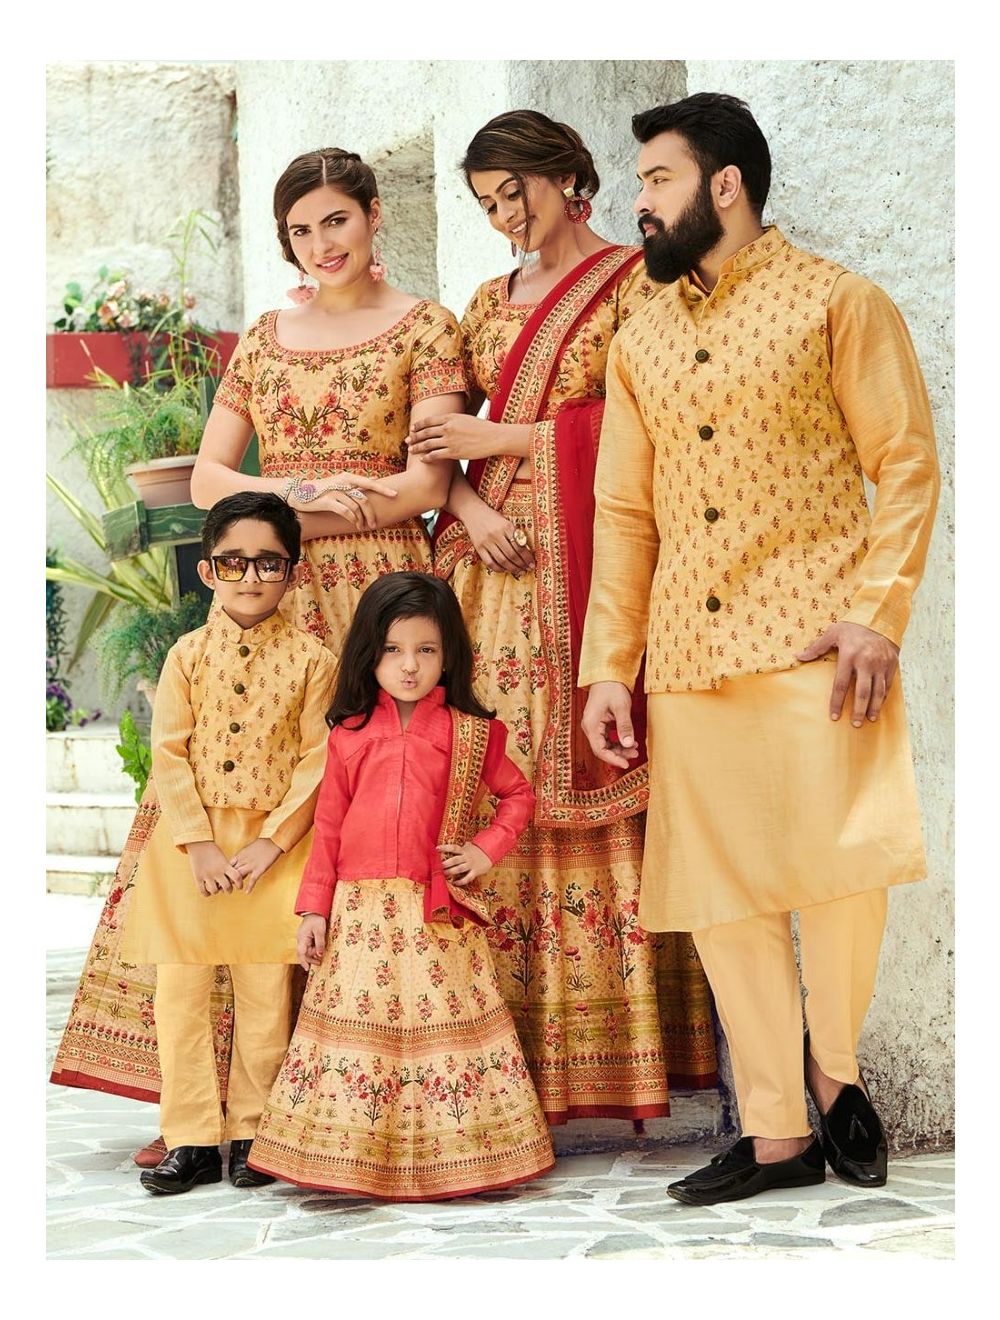 Family Combo Couple Dress Gents Ladies With Daughter Dress at Rs 1299.00 |  महिलाओं की पोशाक, लेडीज़ ड्रेस - Anant Tex Exports Private Limited, Surat |  ID: 2852819627555